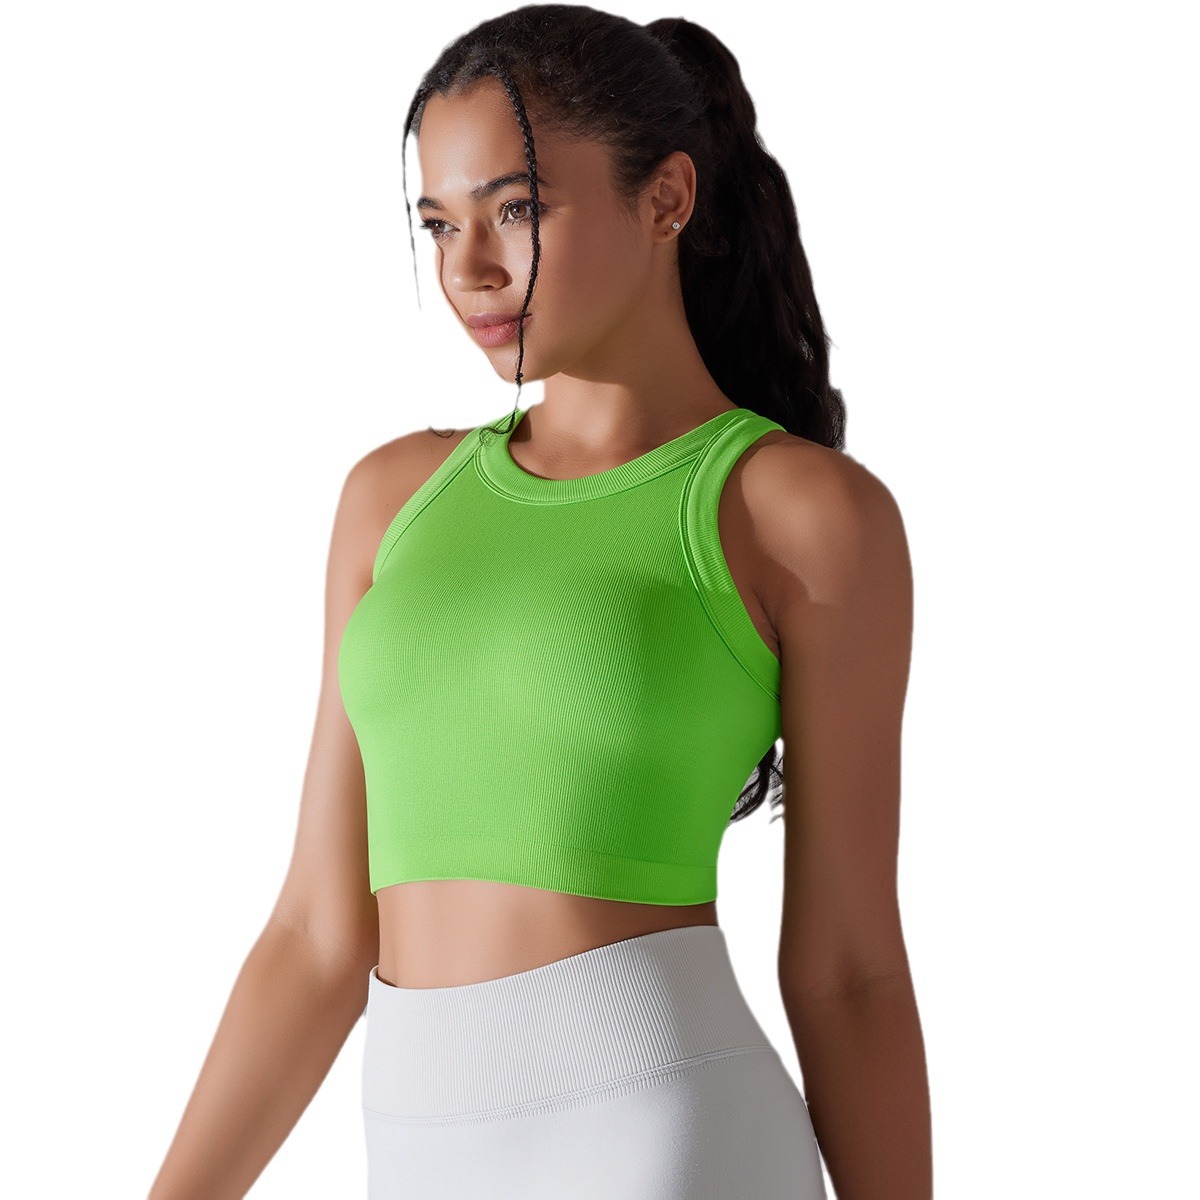 New Seamless Knitted Solid Color Rib Semi-Fixed Cup Yoga Clothes Exercise Sleeveless Vest Running Fitness Top Women